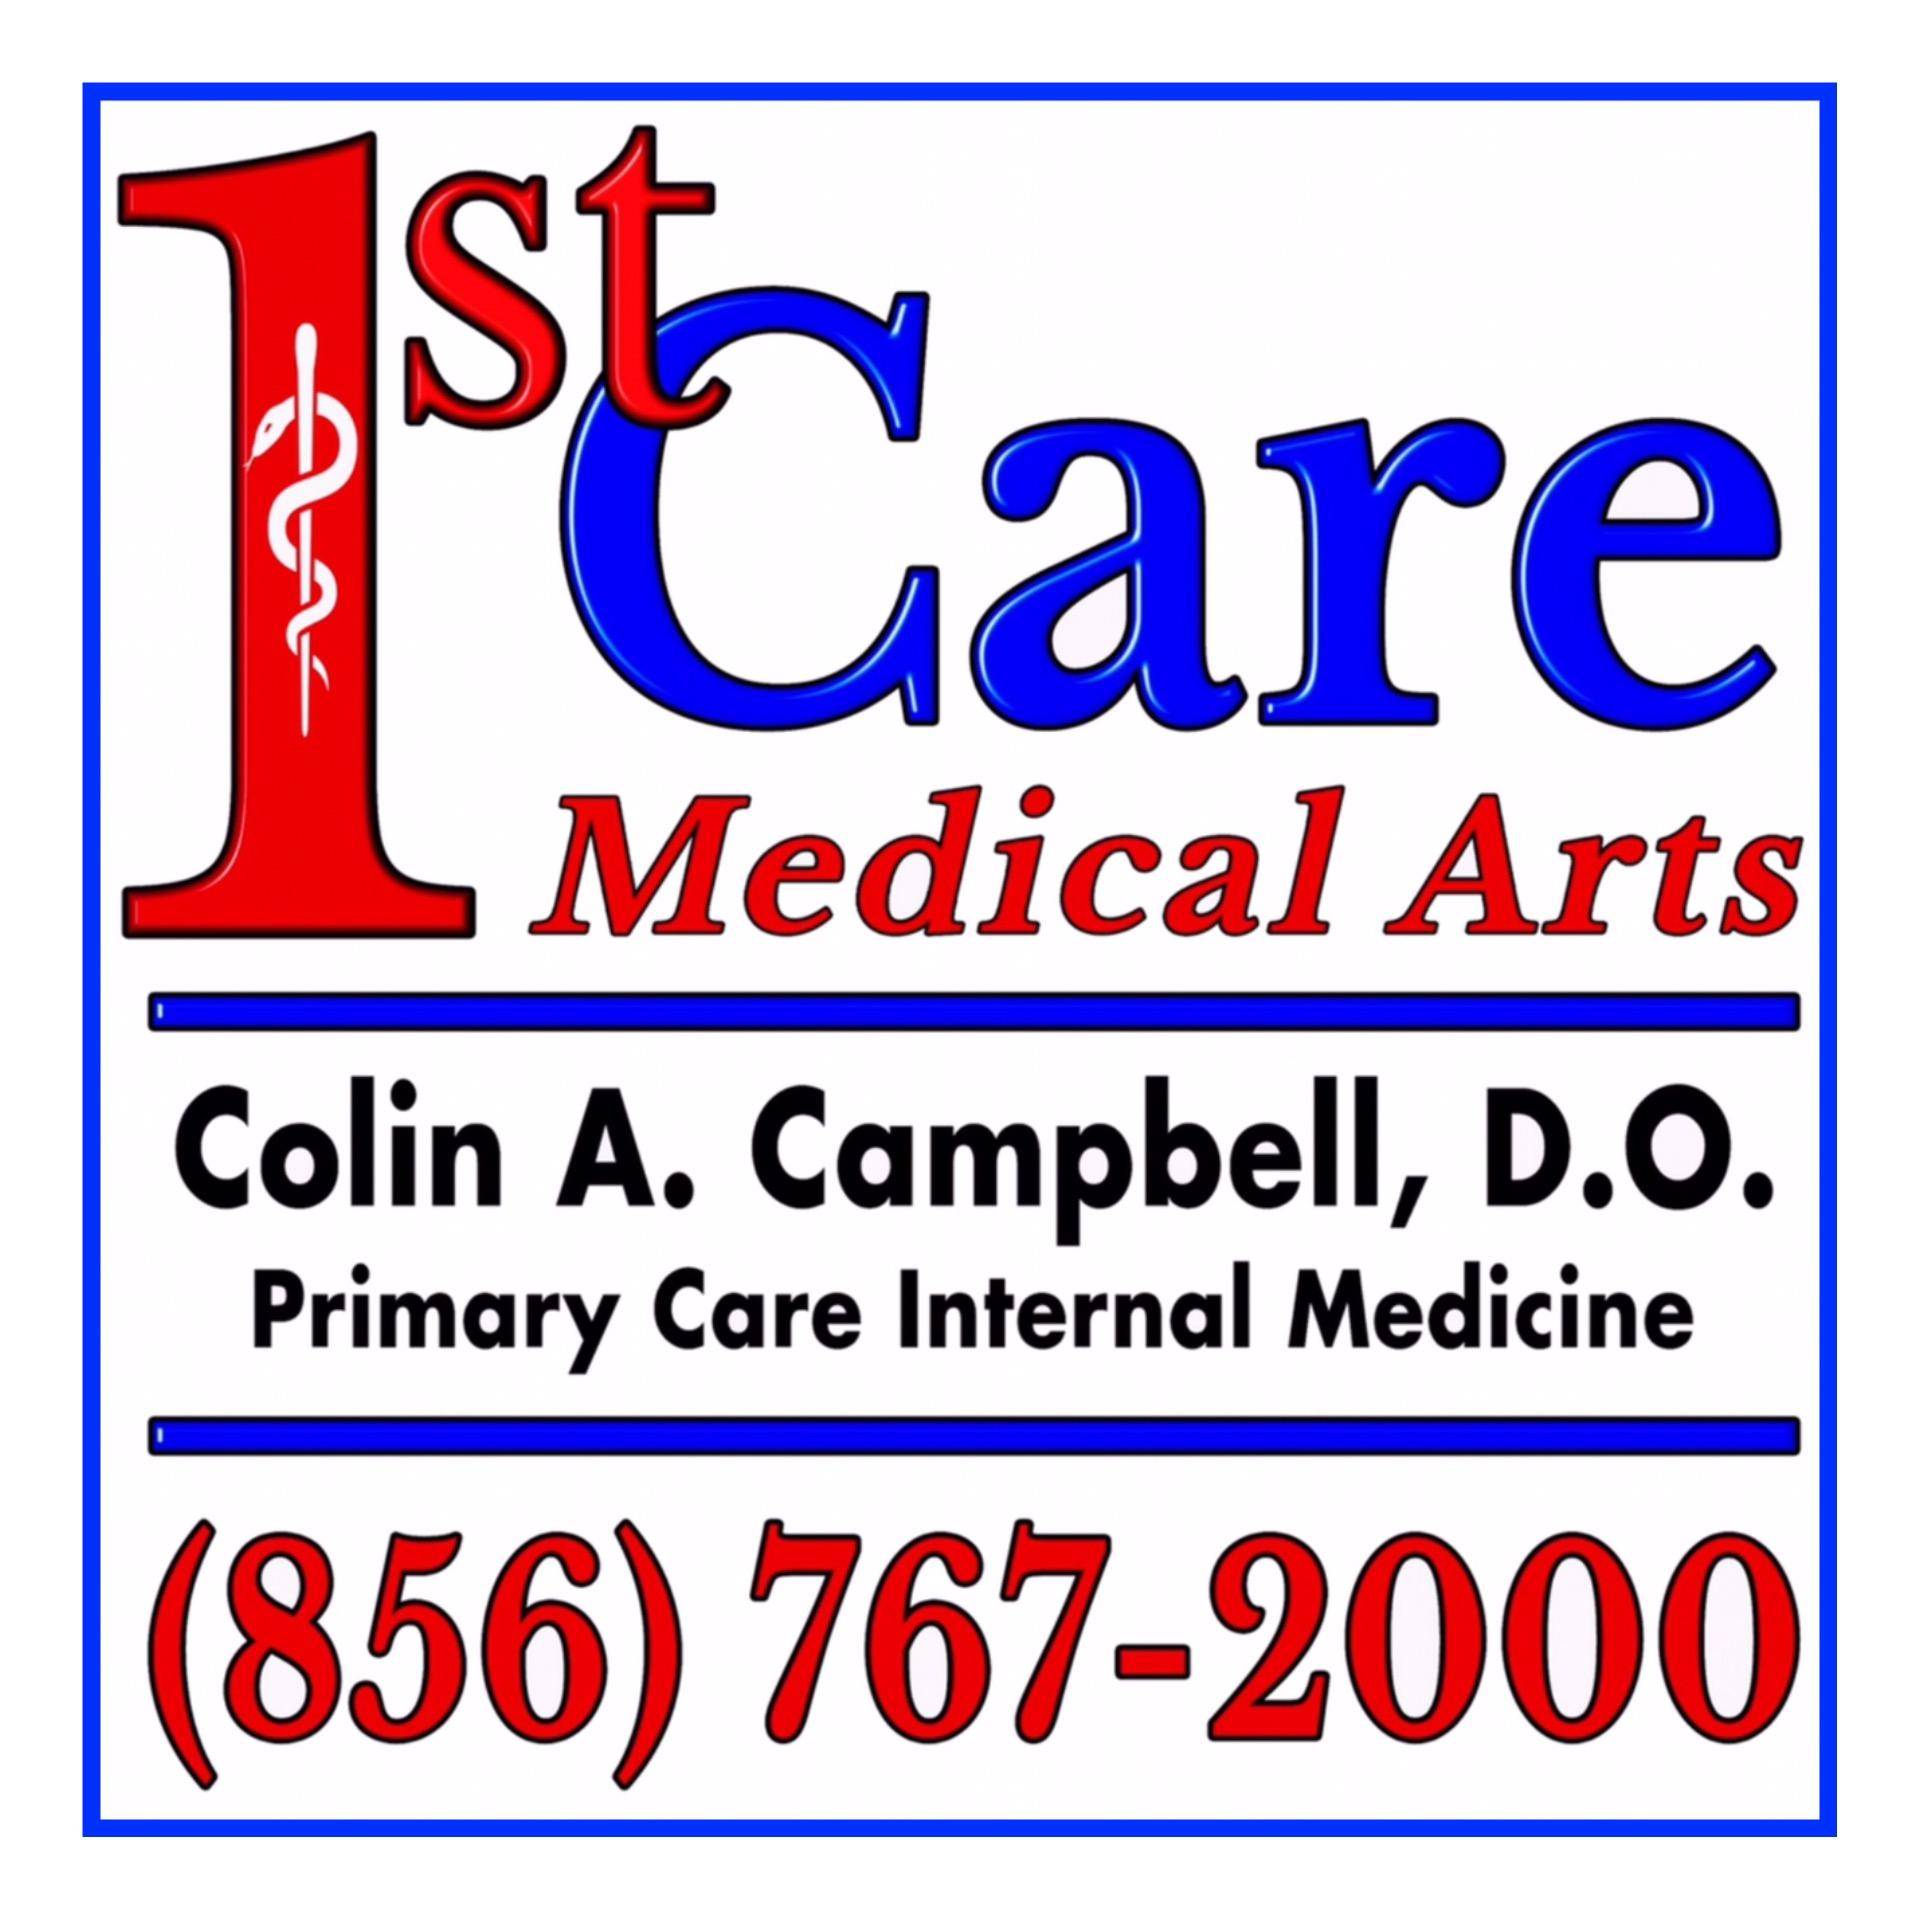 1st Care Medical Arts | 299 Route 73 South, Suite A, West Berlin, NJ 08091, United States | Phone: (856) 767-2000